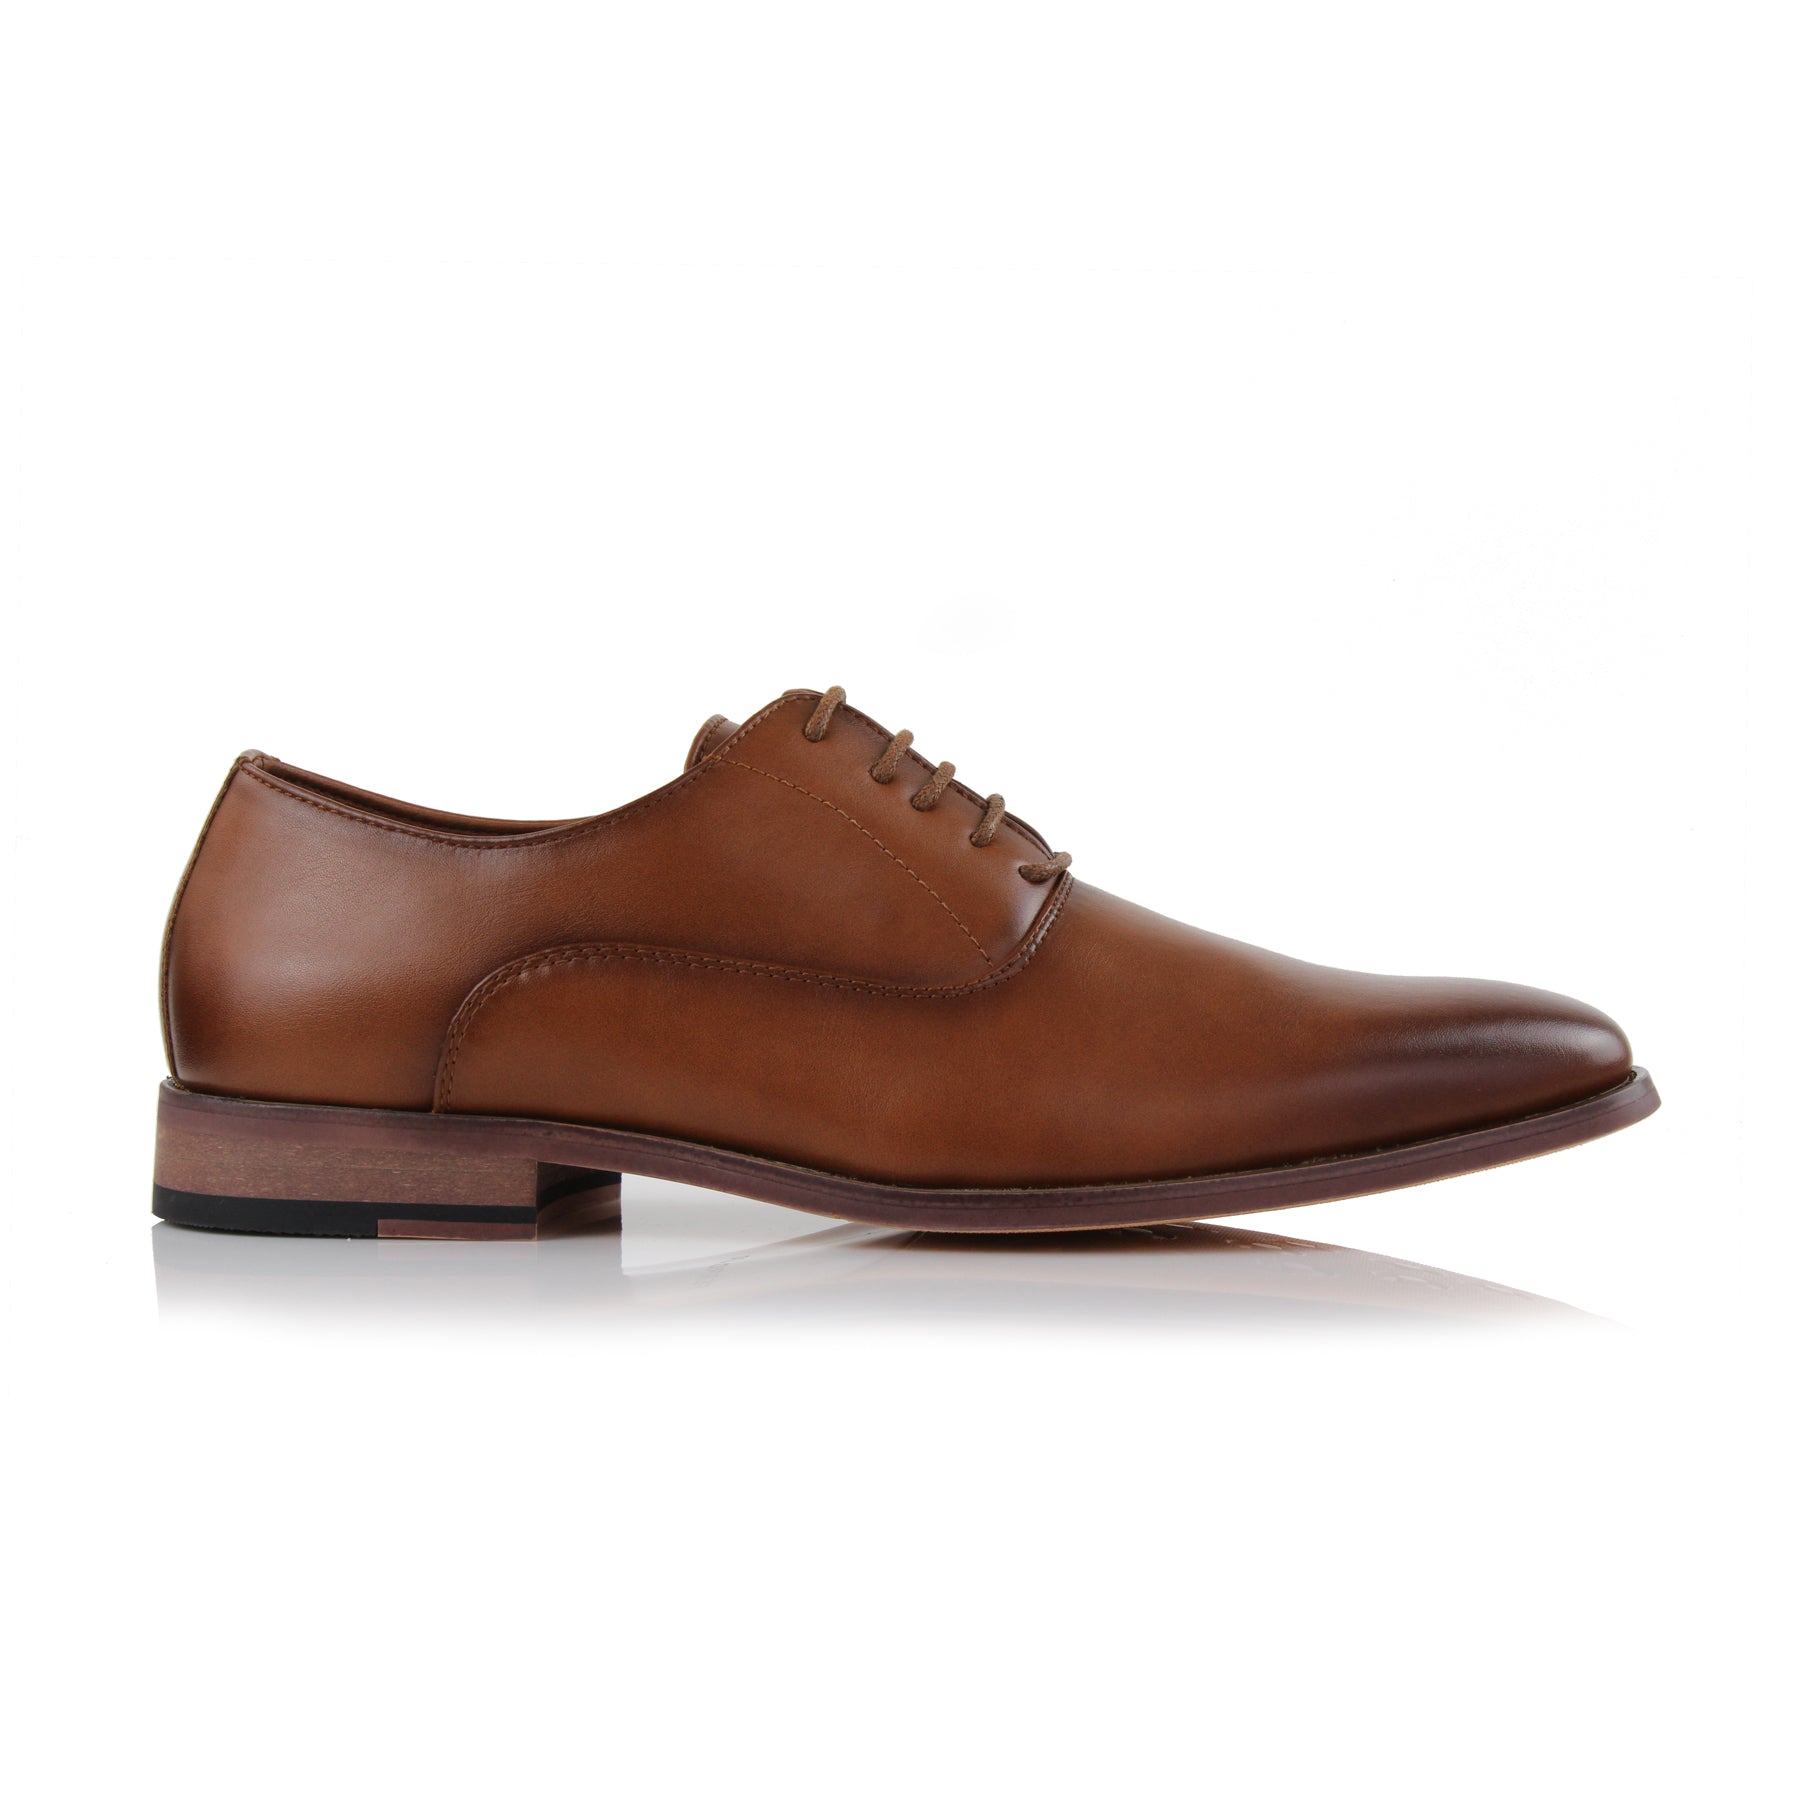 Burnished Leather Oxfords | George by Ferro Aldo | Conal Footwear | Outer Side Angle View